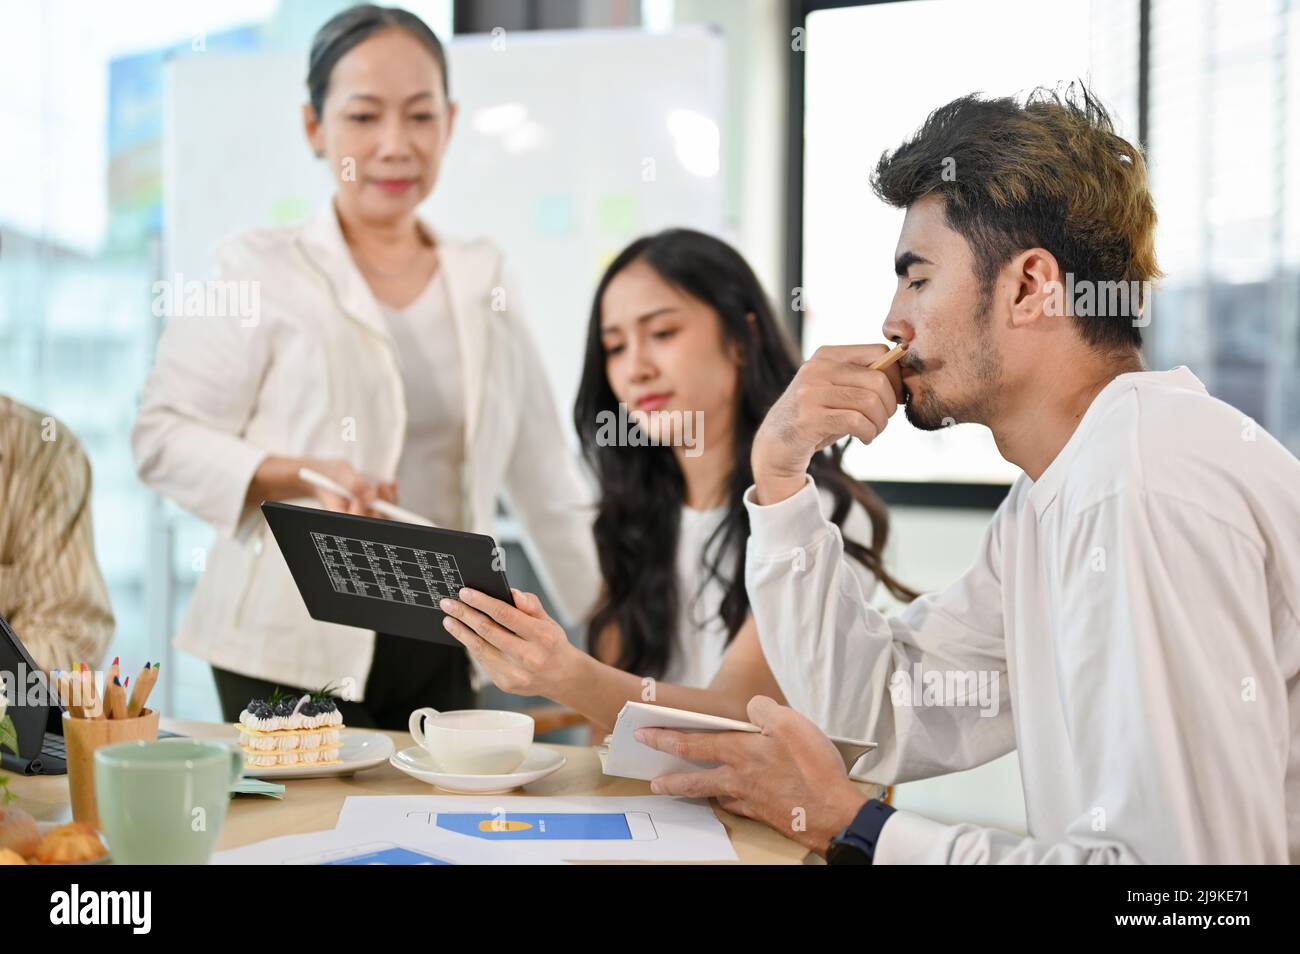 A group of graphic designers and web developers are in the meeting with aged senior female executive manager. Stock Photo